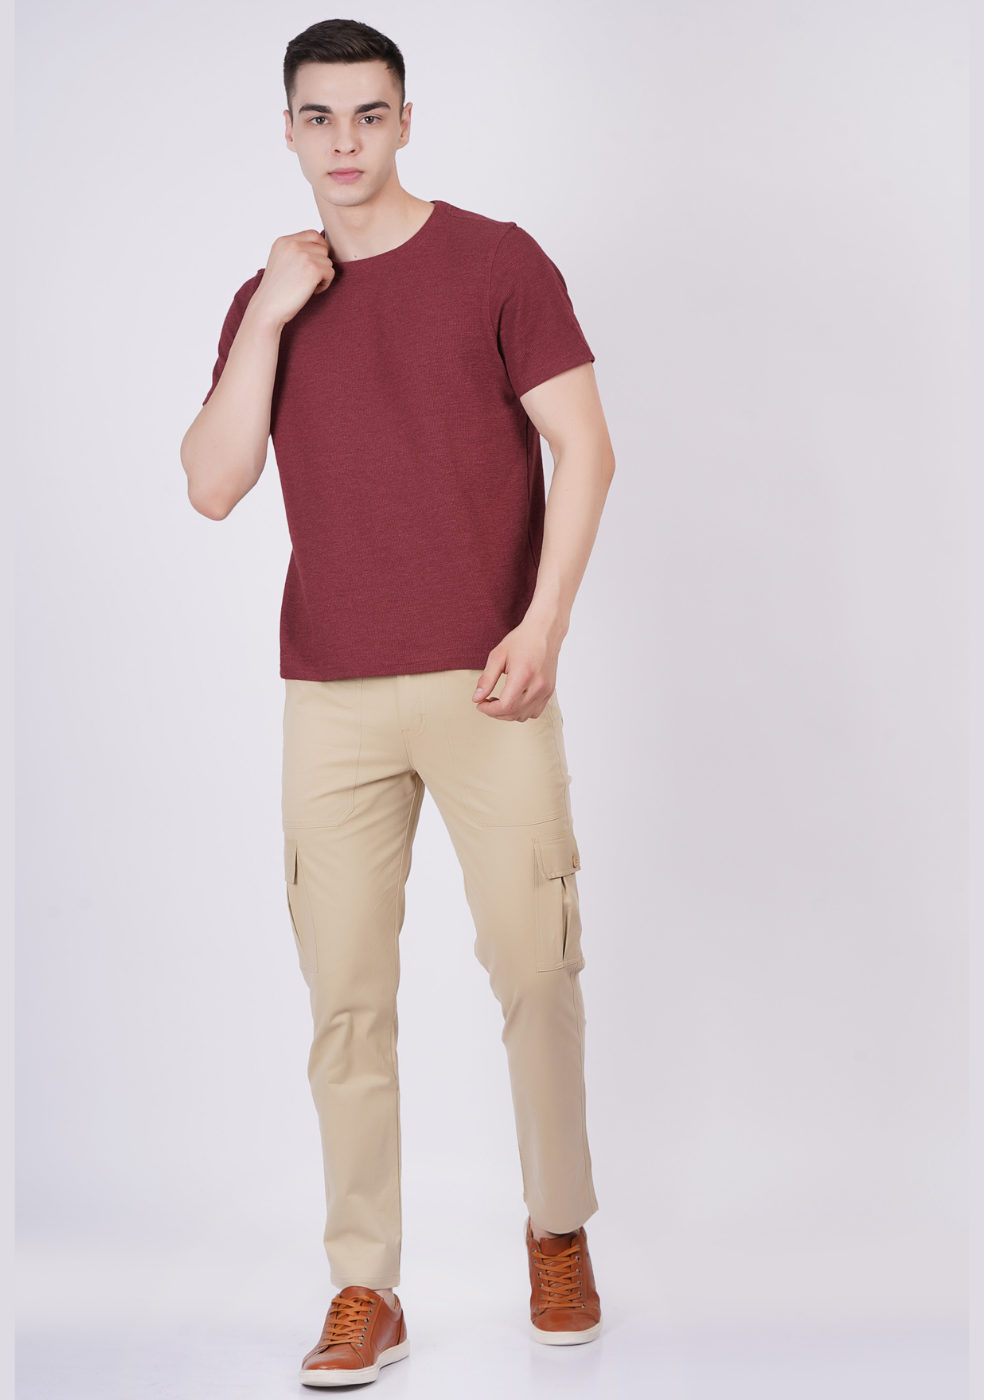 Cargo pants for men with cross pocket